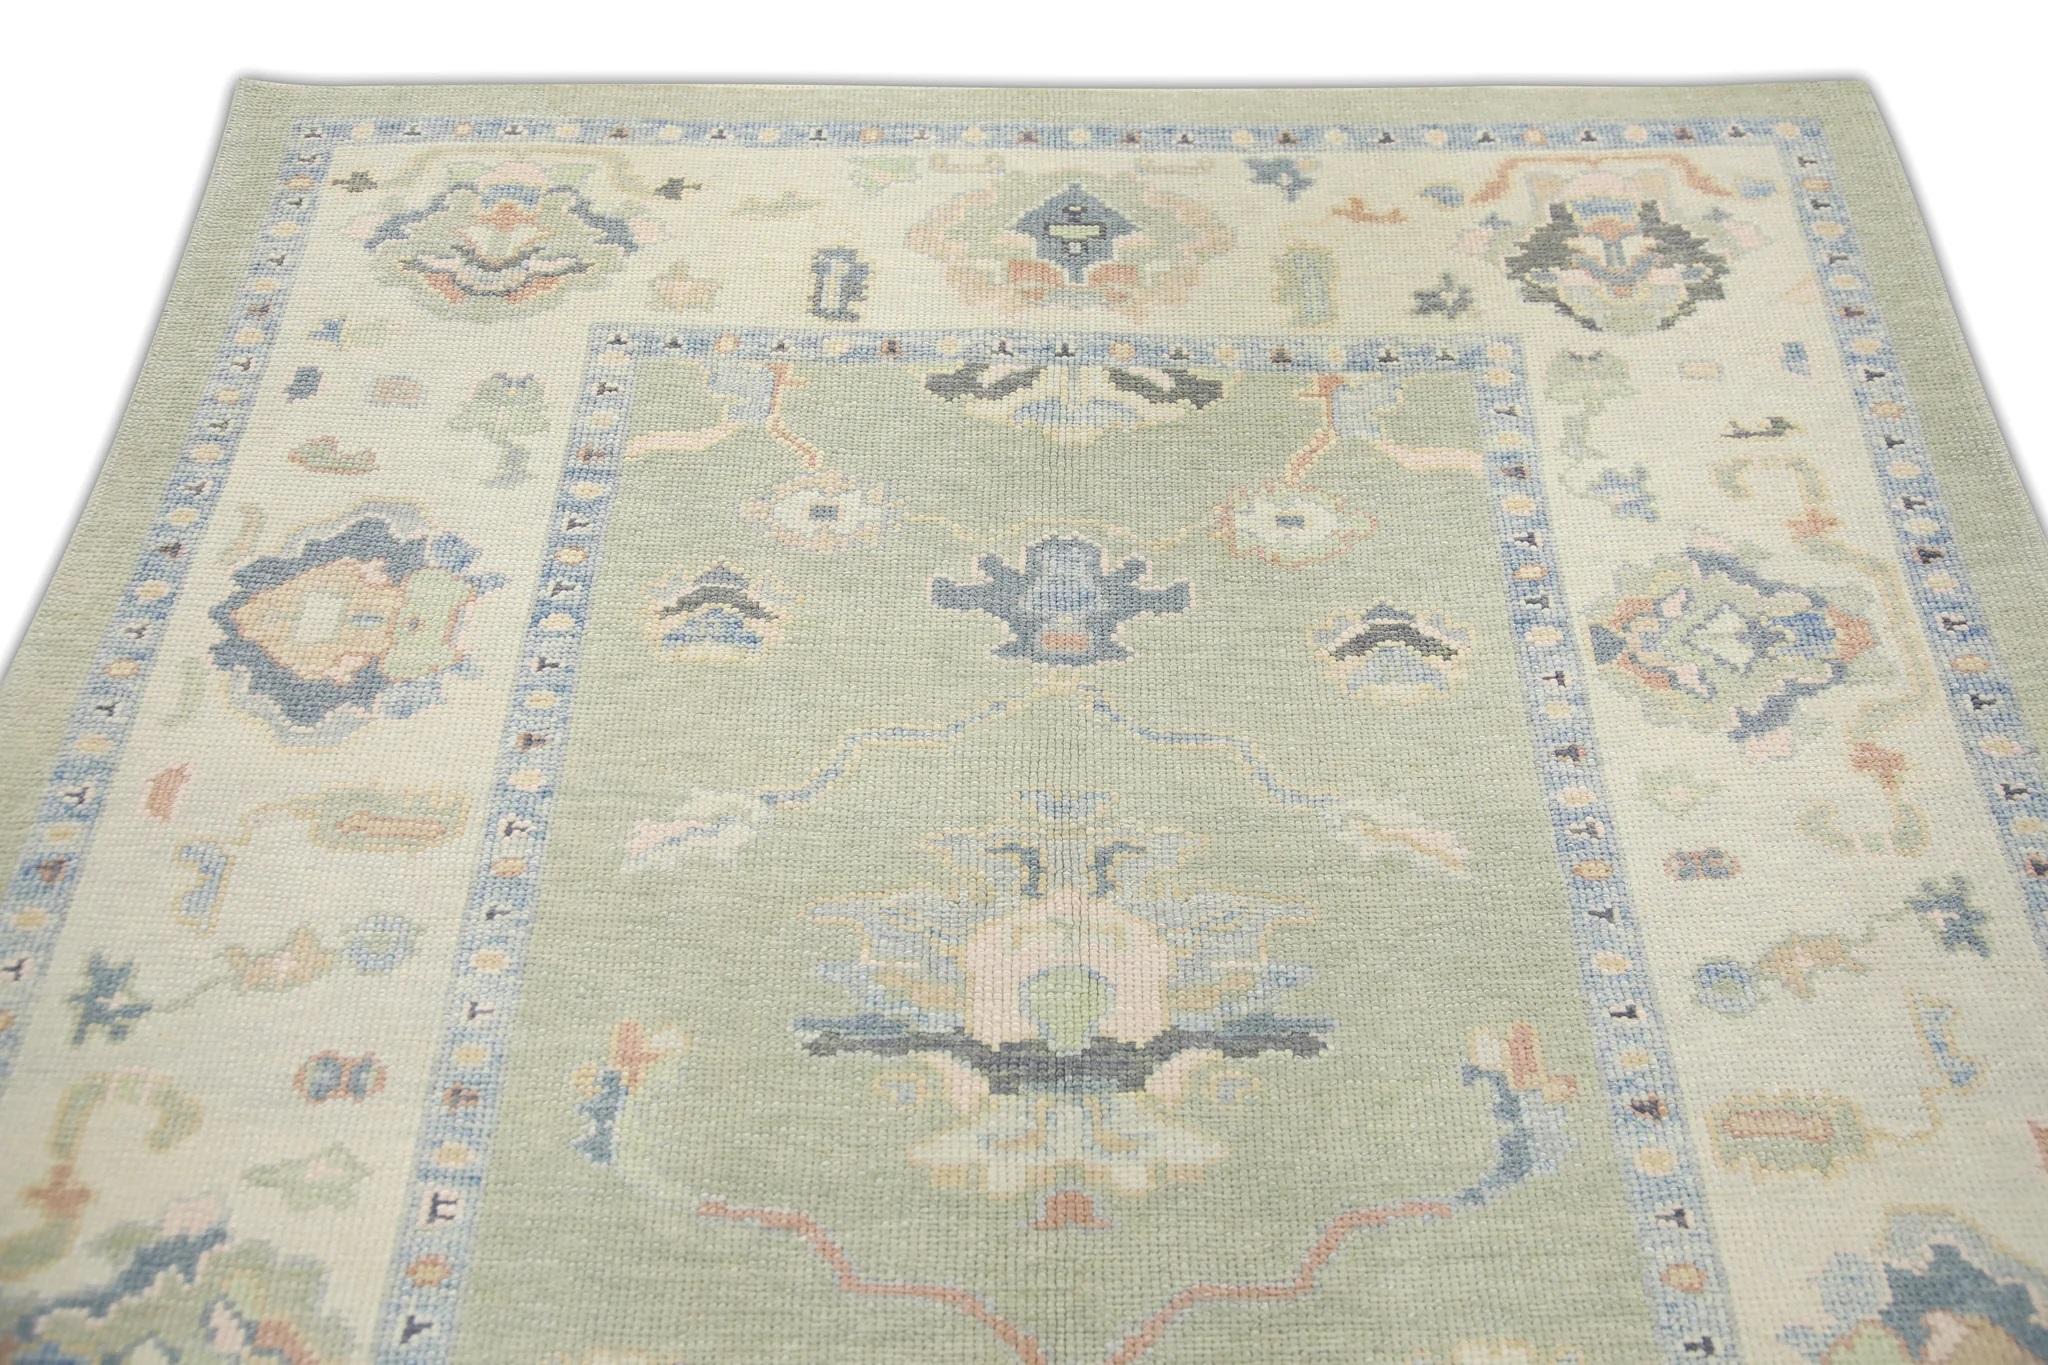 Contemporary Celadon Green Handwoven Wool Turkish Oushak Rug in Floral Design 5'1